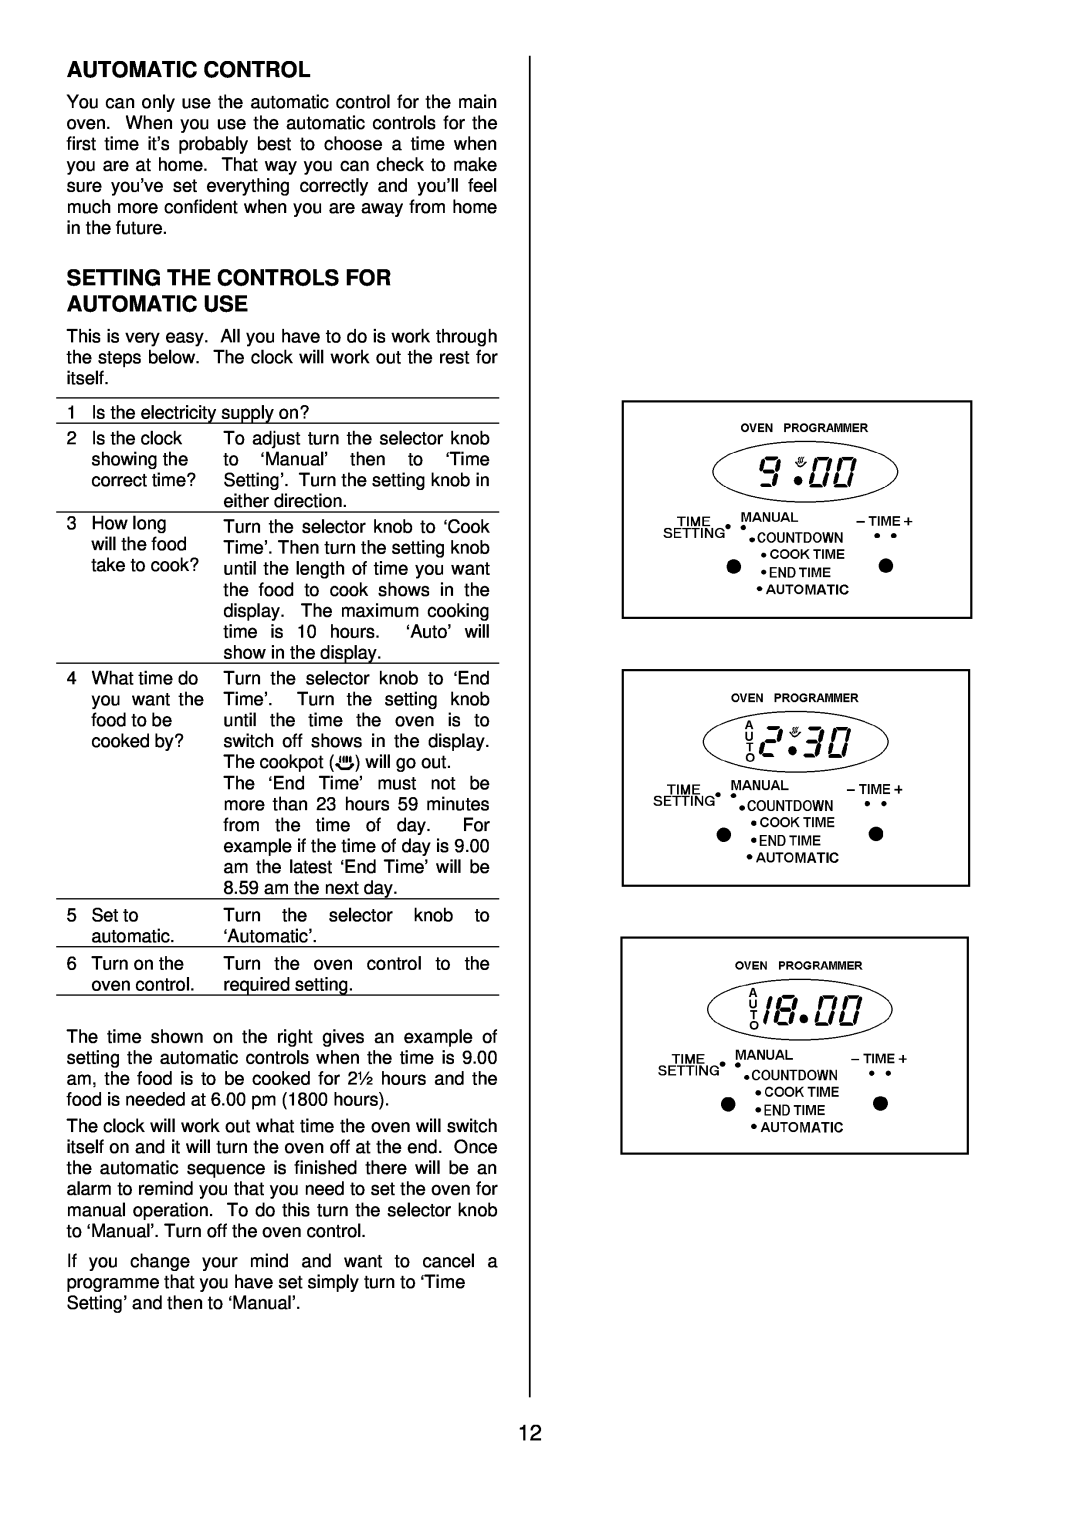 Tricity Bendix SB462 installation instructions Automatic Control, Setting The Controls For Automatic Use 